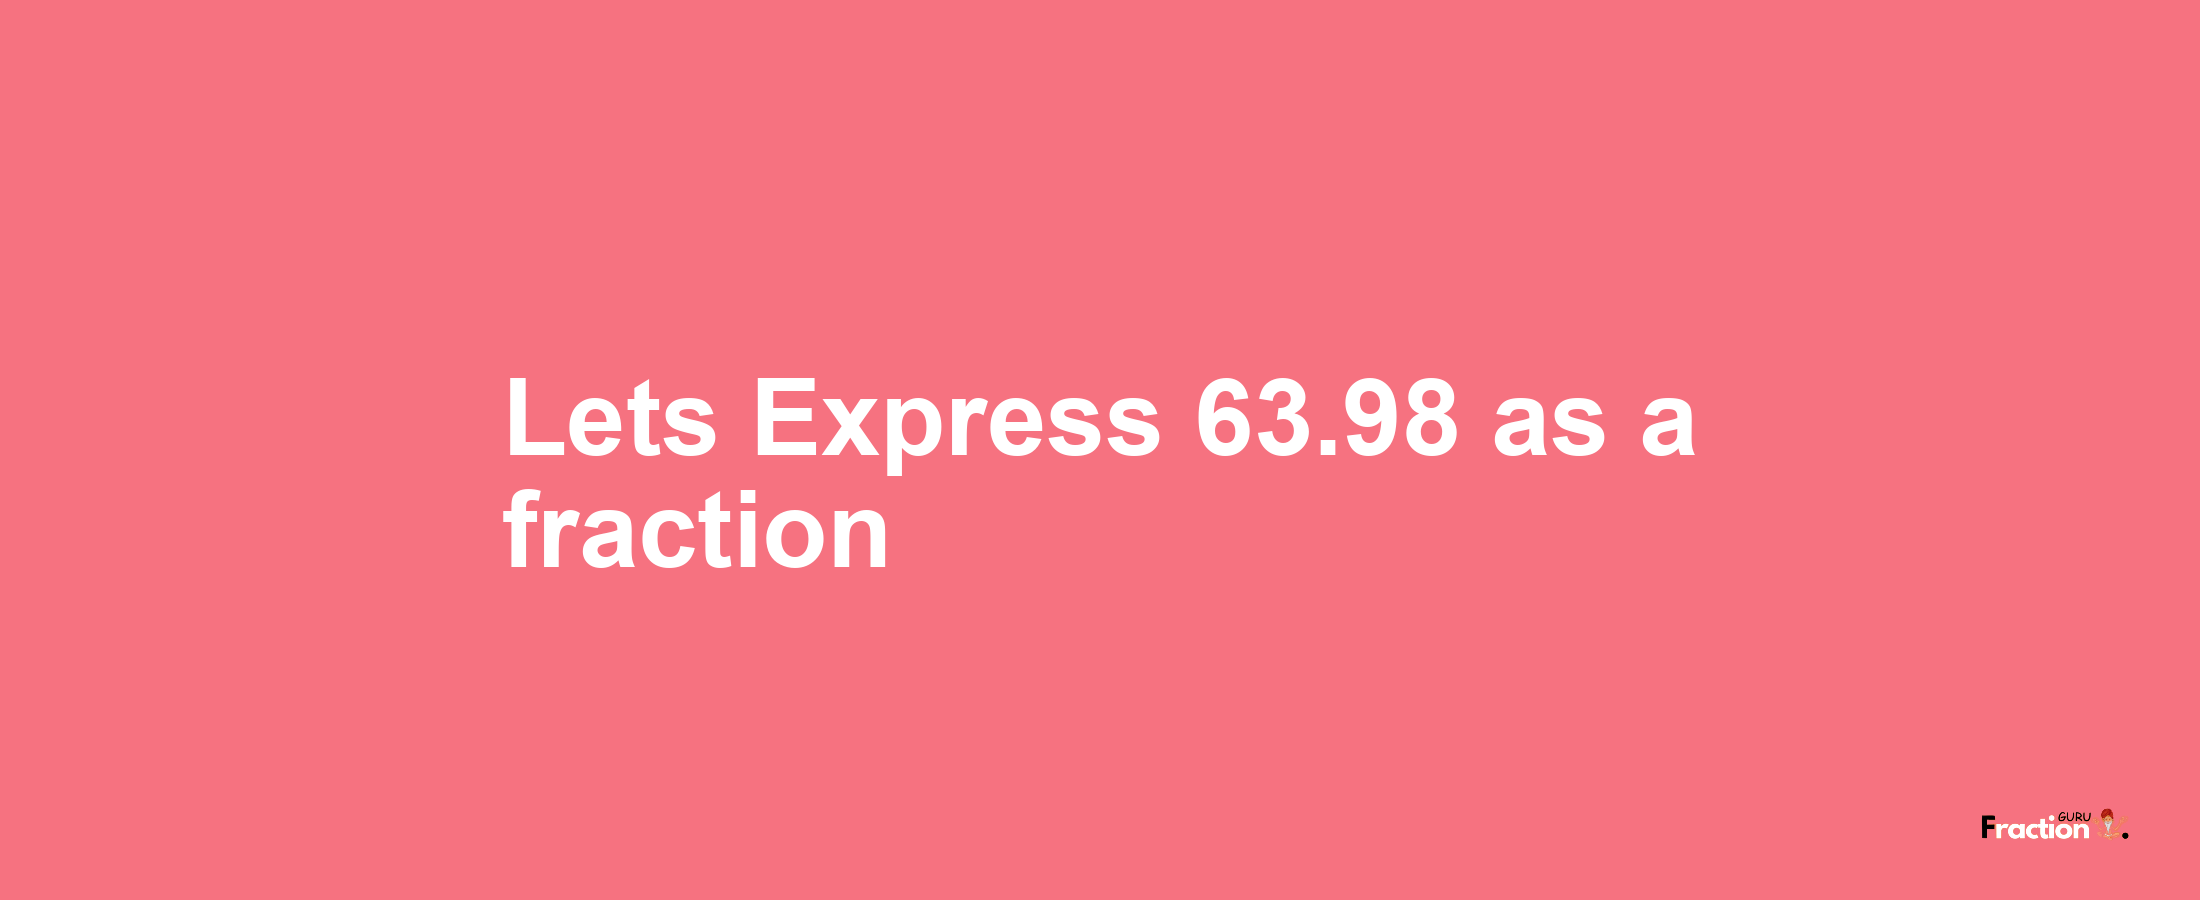 Lets Express 63.98 as afraction